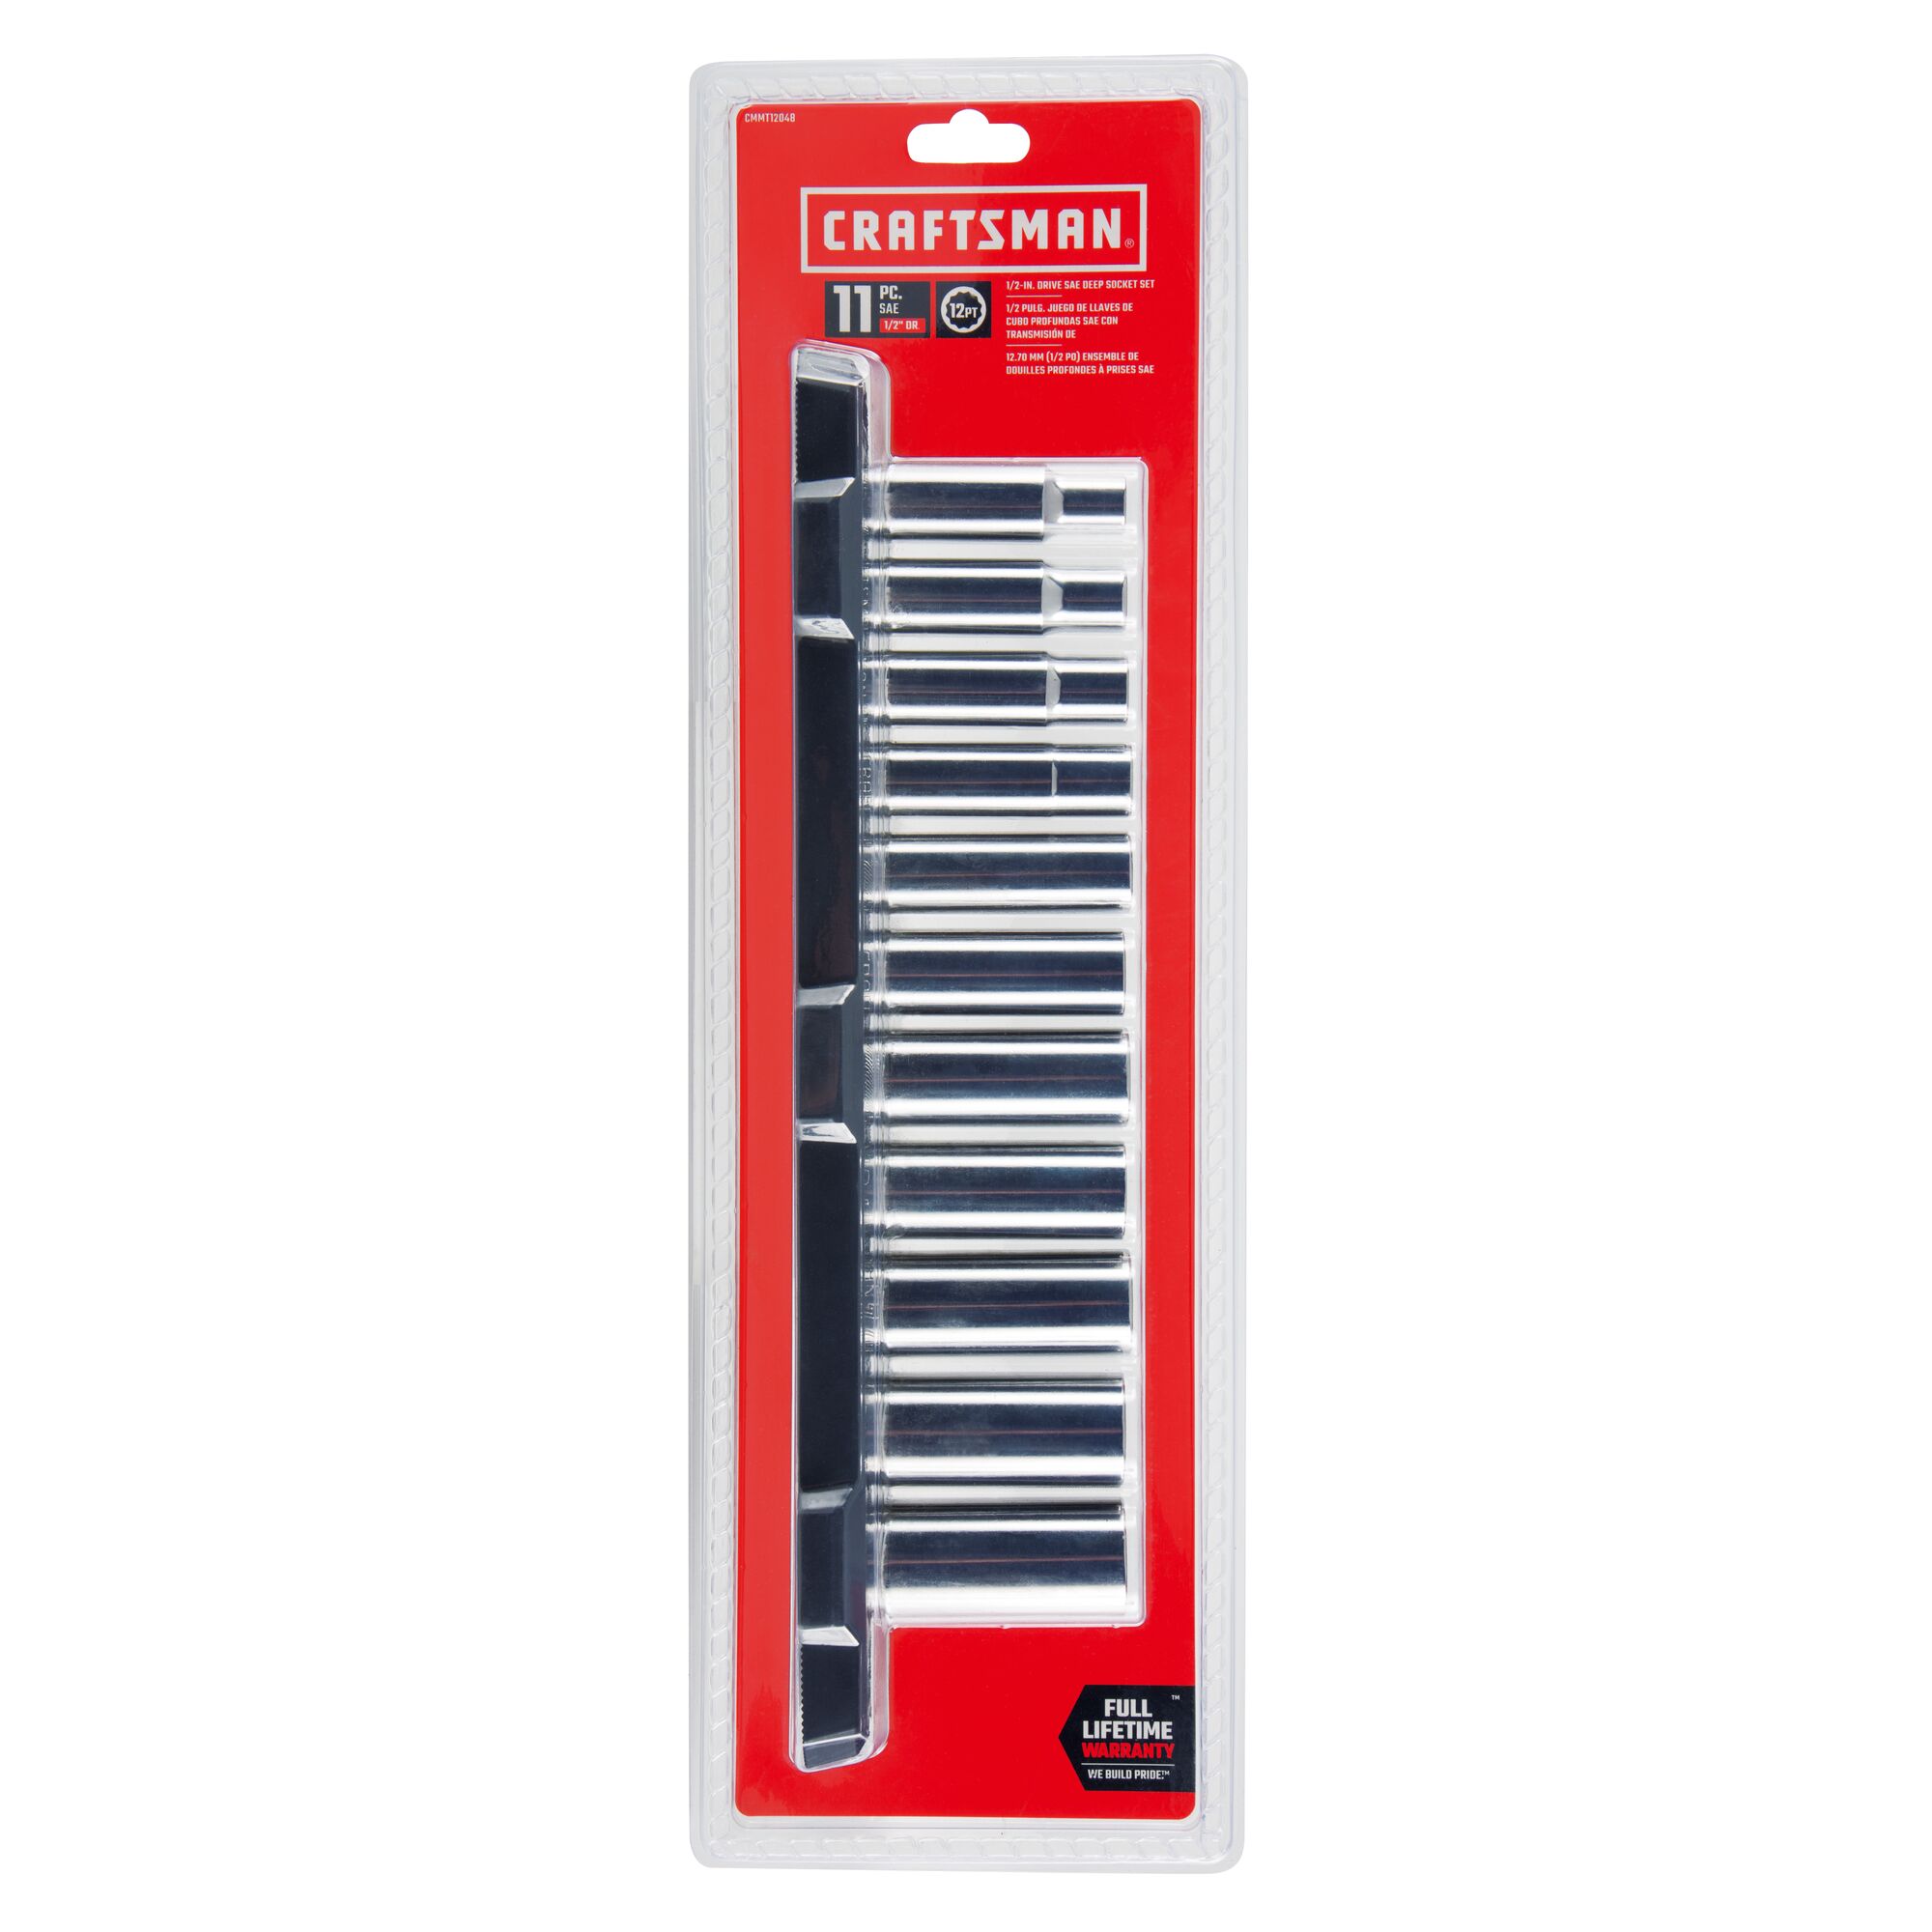 11 piece half inch drive s a e 12 point deep socket set in plastic packaging.